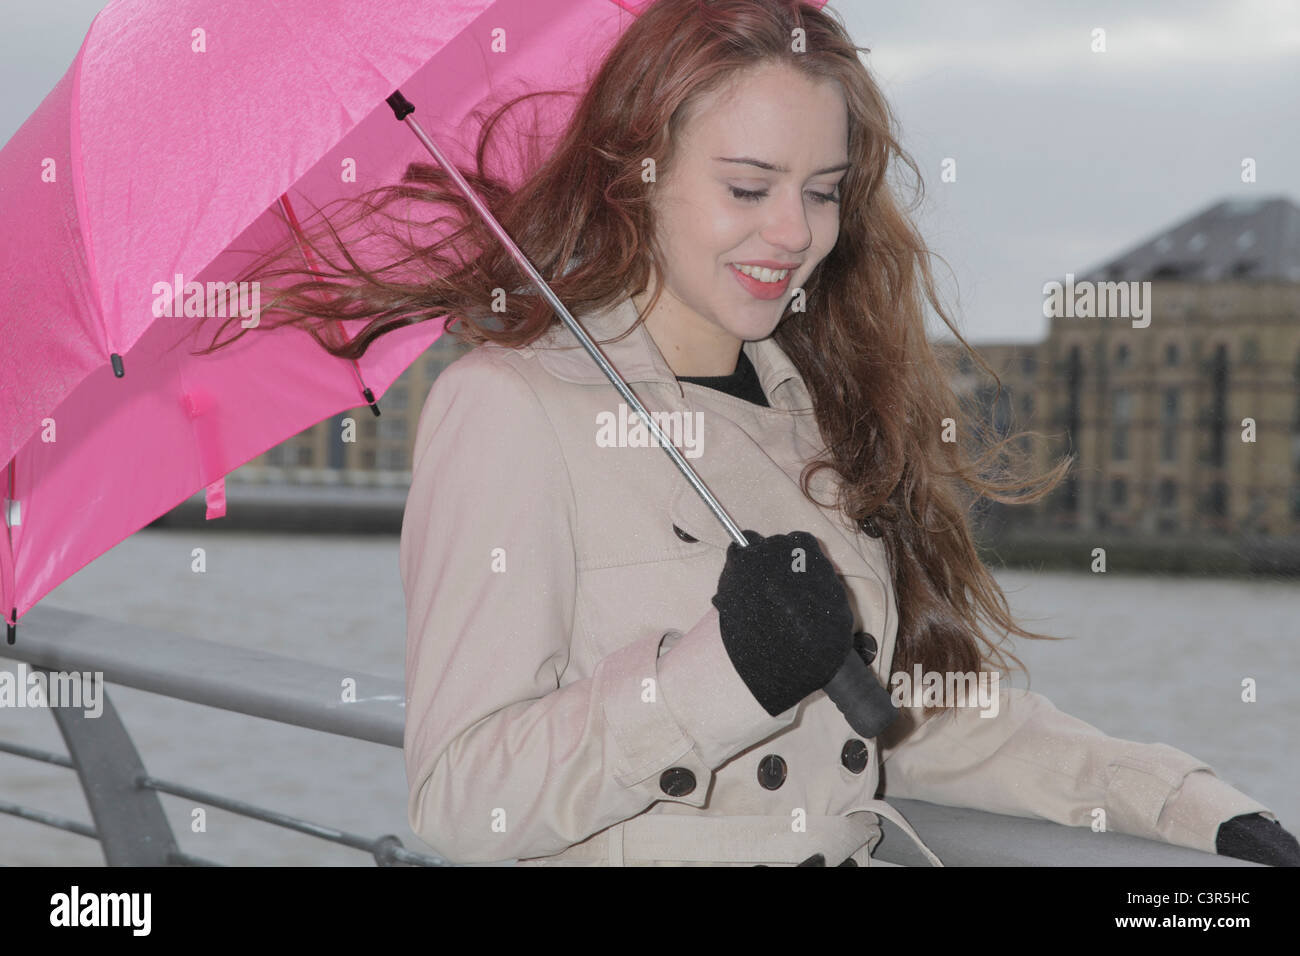 Young woman with pink umbrella Stock Photo